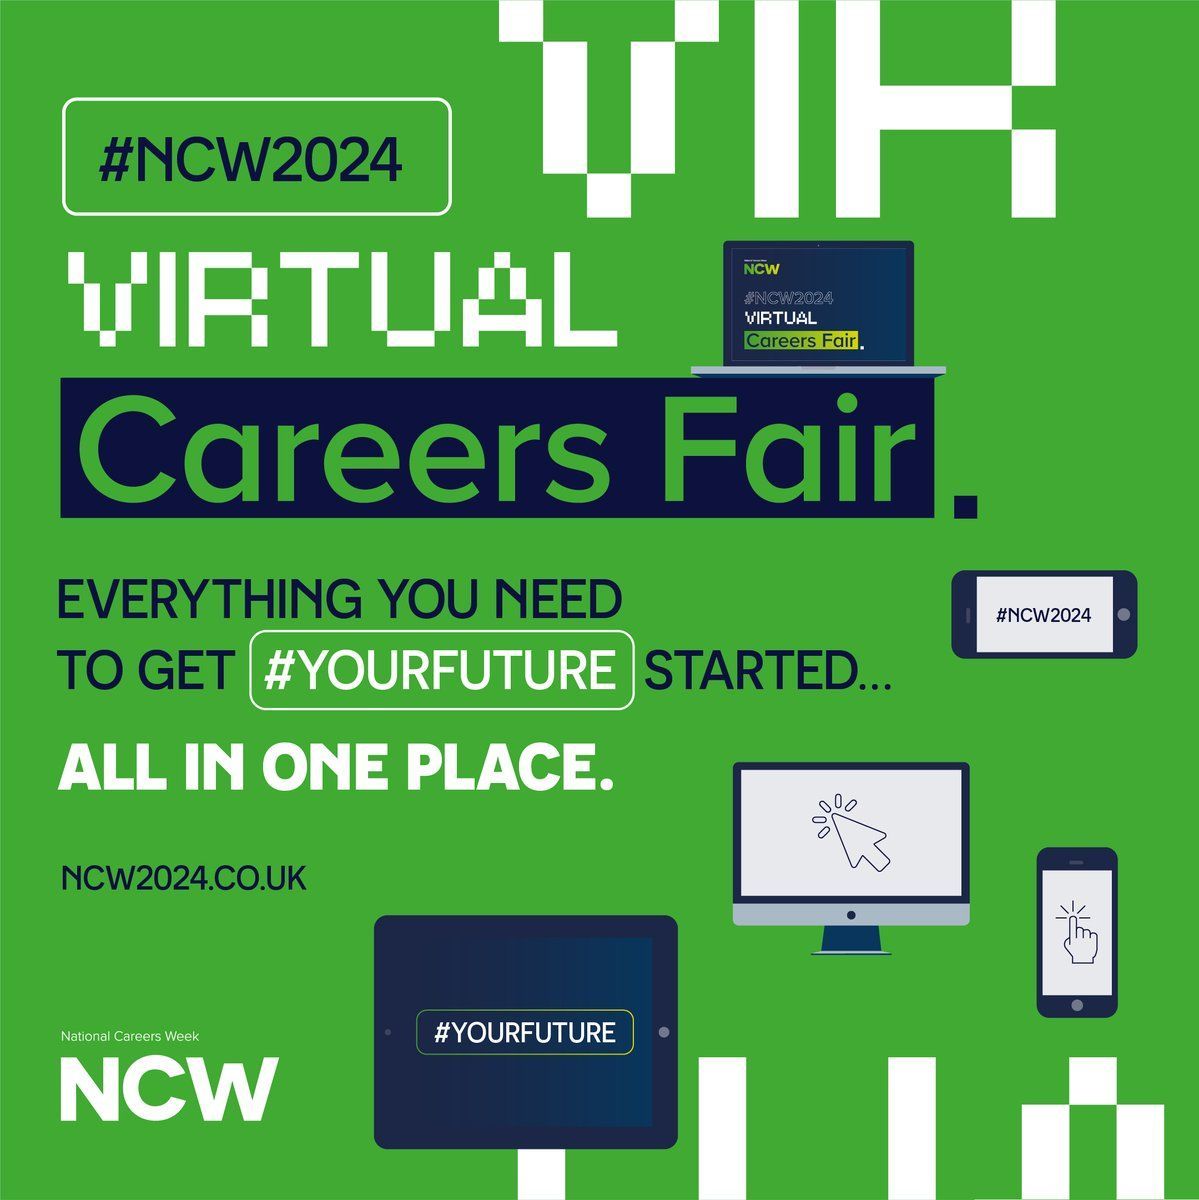 Everything you need to get #yourfuture started . . . . Explore our 𝙑𝙞𝙧𝙩𝙪𝙖𝙡 𝘾𝙖𝙧𝙚𝙚𝙧𝙨 𝙁𝙖𝙞𝙧 👇 buff.ly/4bl1nBy #NCW2024 #NationalCareersWeek